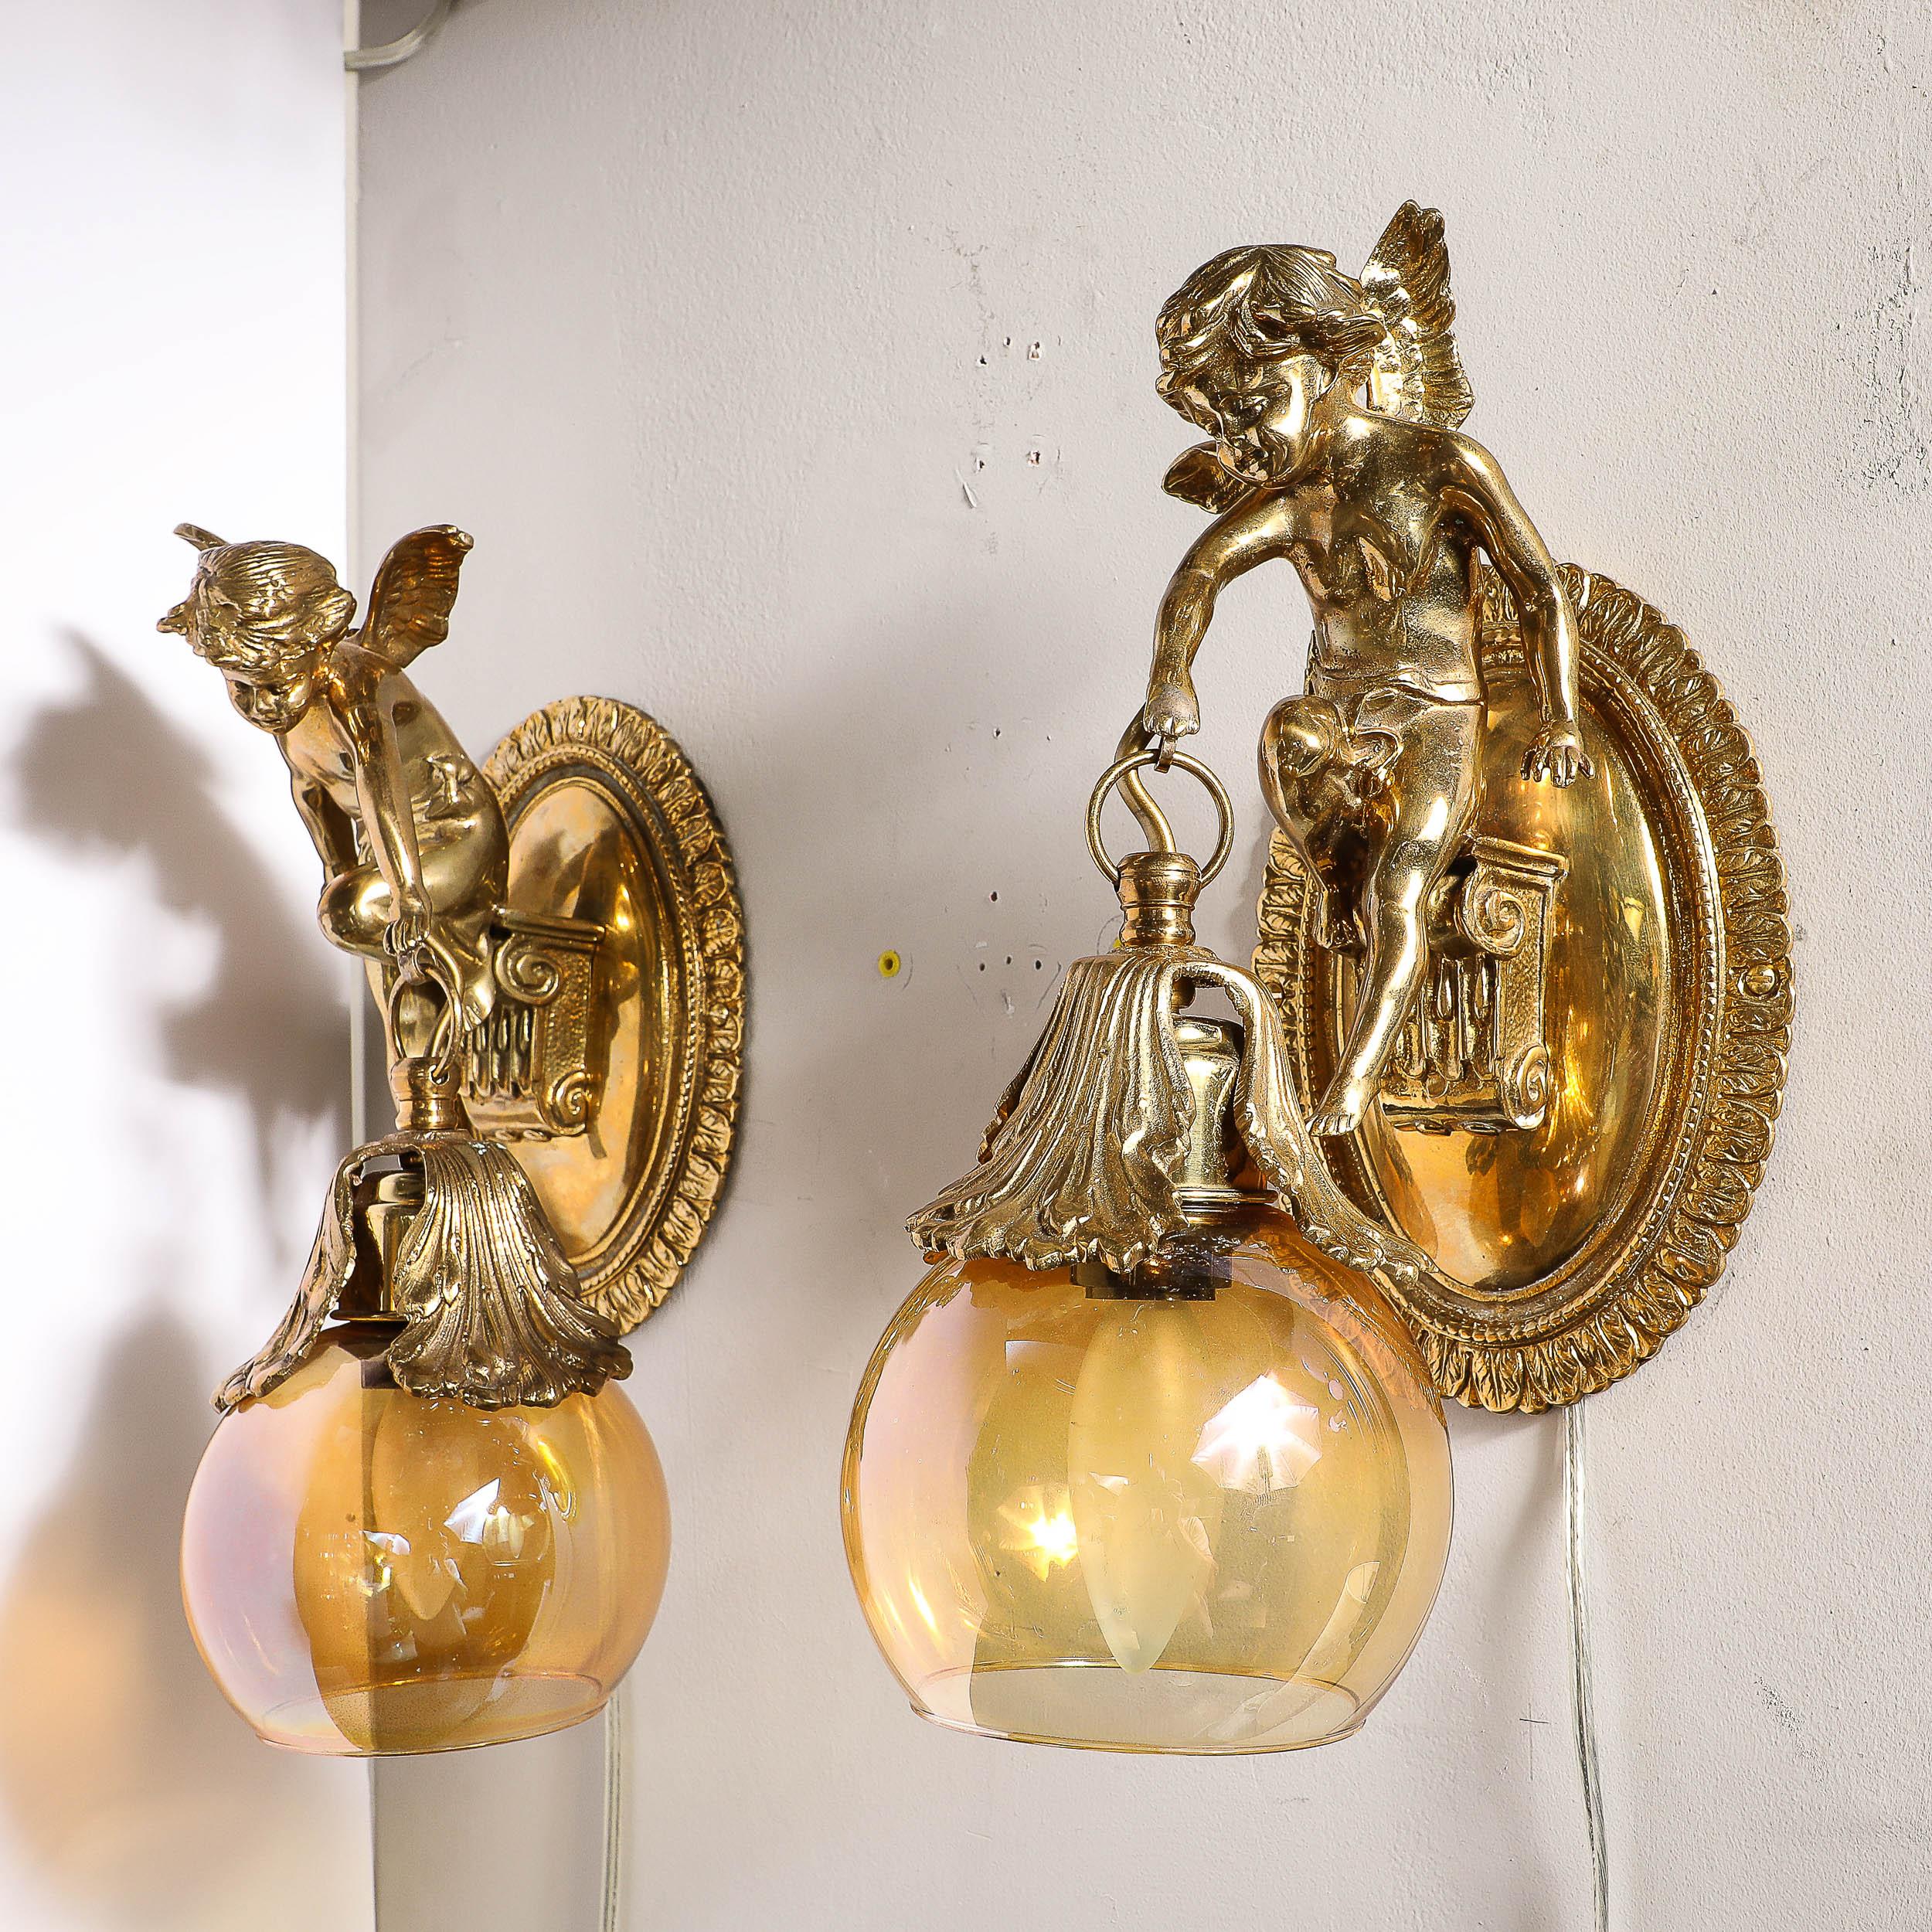 Pair of Neoclassical Cherub Sconces in Antique Brass w/ Smoked Amber Shades For Sale 13